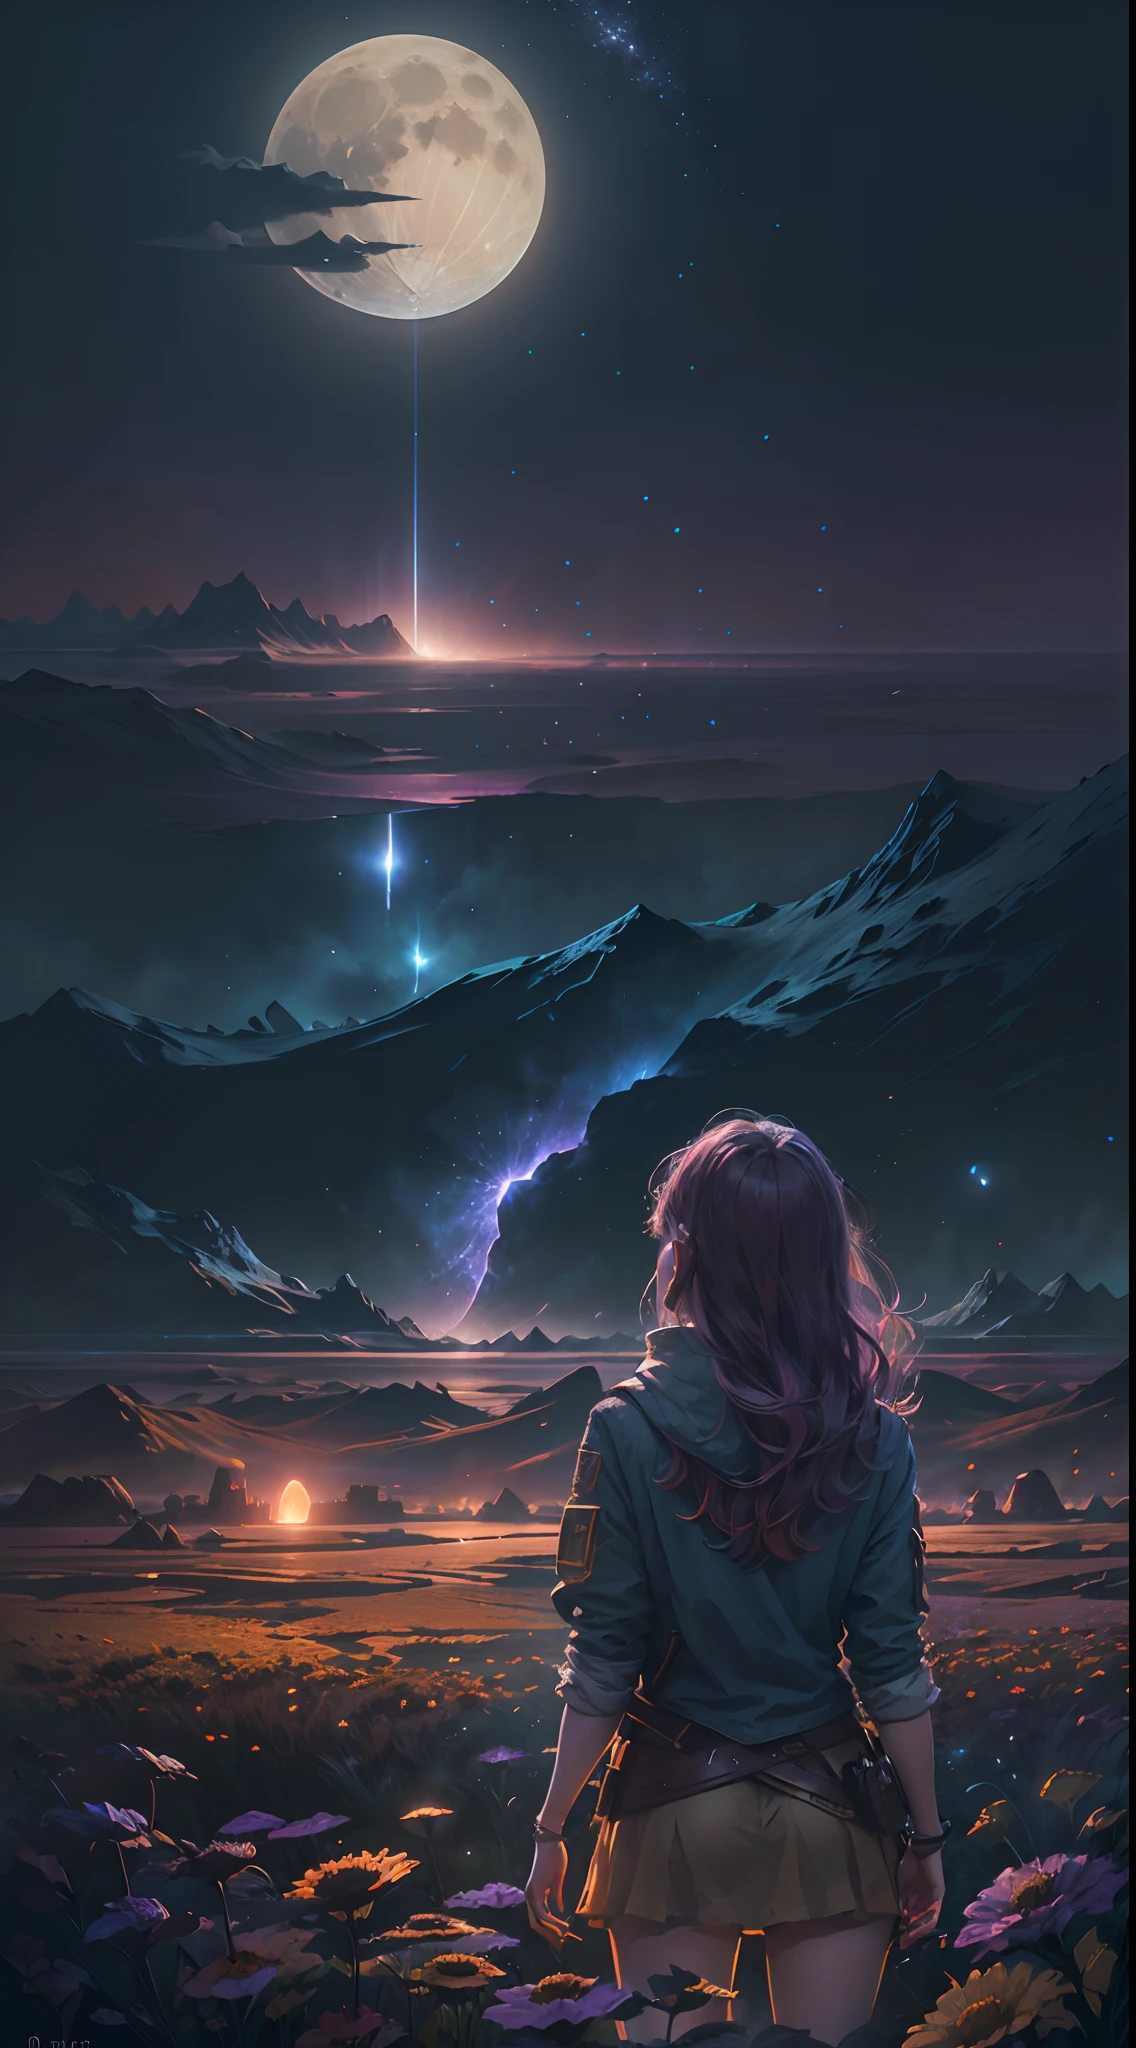 expansive landscape photograph, (Look below.), Above is the sky, Below is an open field), A girl standing on a flower field looking up, (Full Moon: 1.2), (Meteor: 0.9), (Nebula: 1.3), distant mountain, Tree BREAK making art, (Warm light source: 1.2), (Firefly: 1.2), lights, Lots of purple and orange, complicated detail, volume lighting, Realism BREAK (Masterpiece: 1.2), （best quality）, Ultra-detailed, (Dynamic composition: 1.4), RAWExtremely detailed, Colorful details, (Rainbow colors: 1.2), (glowing lighting, atmospheric lighting), Dreamlike, Magical, (Solo: 1.2), 4k